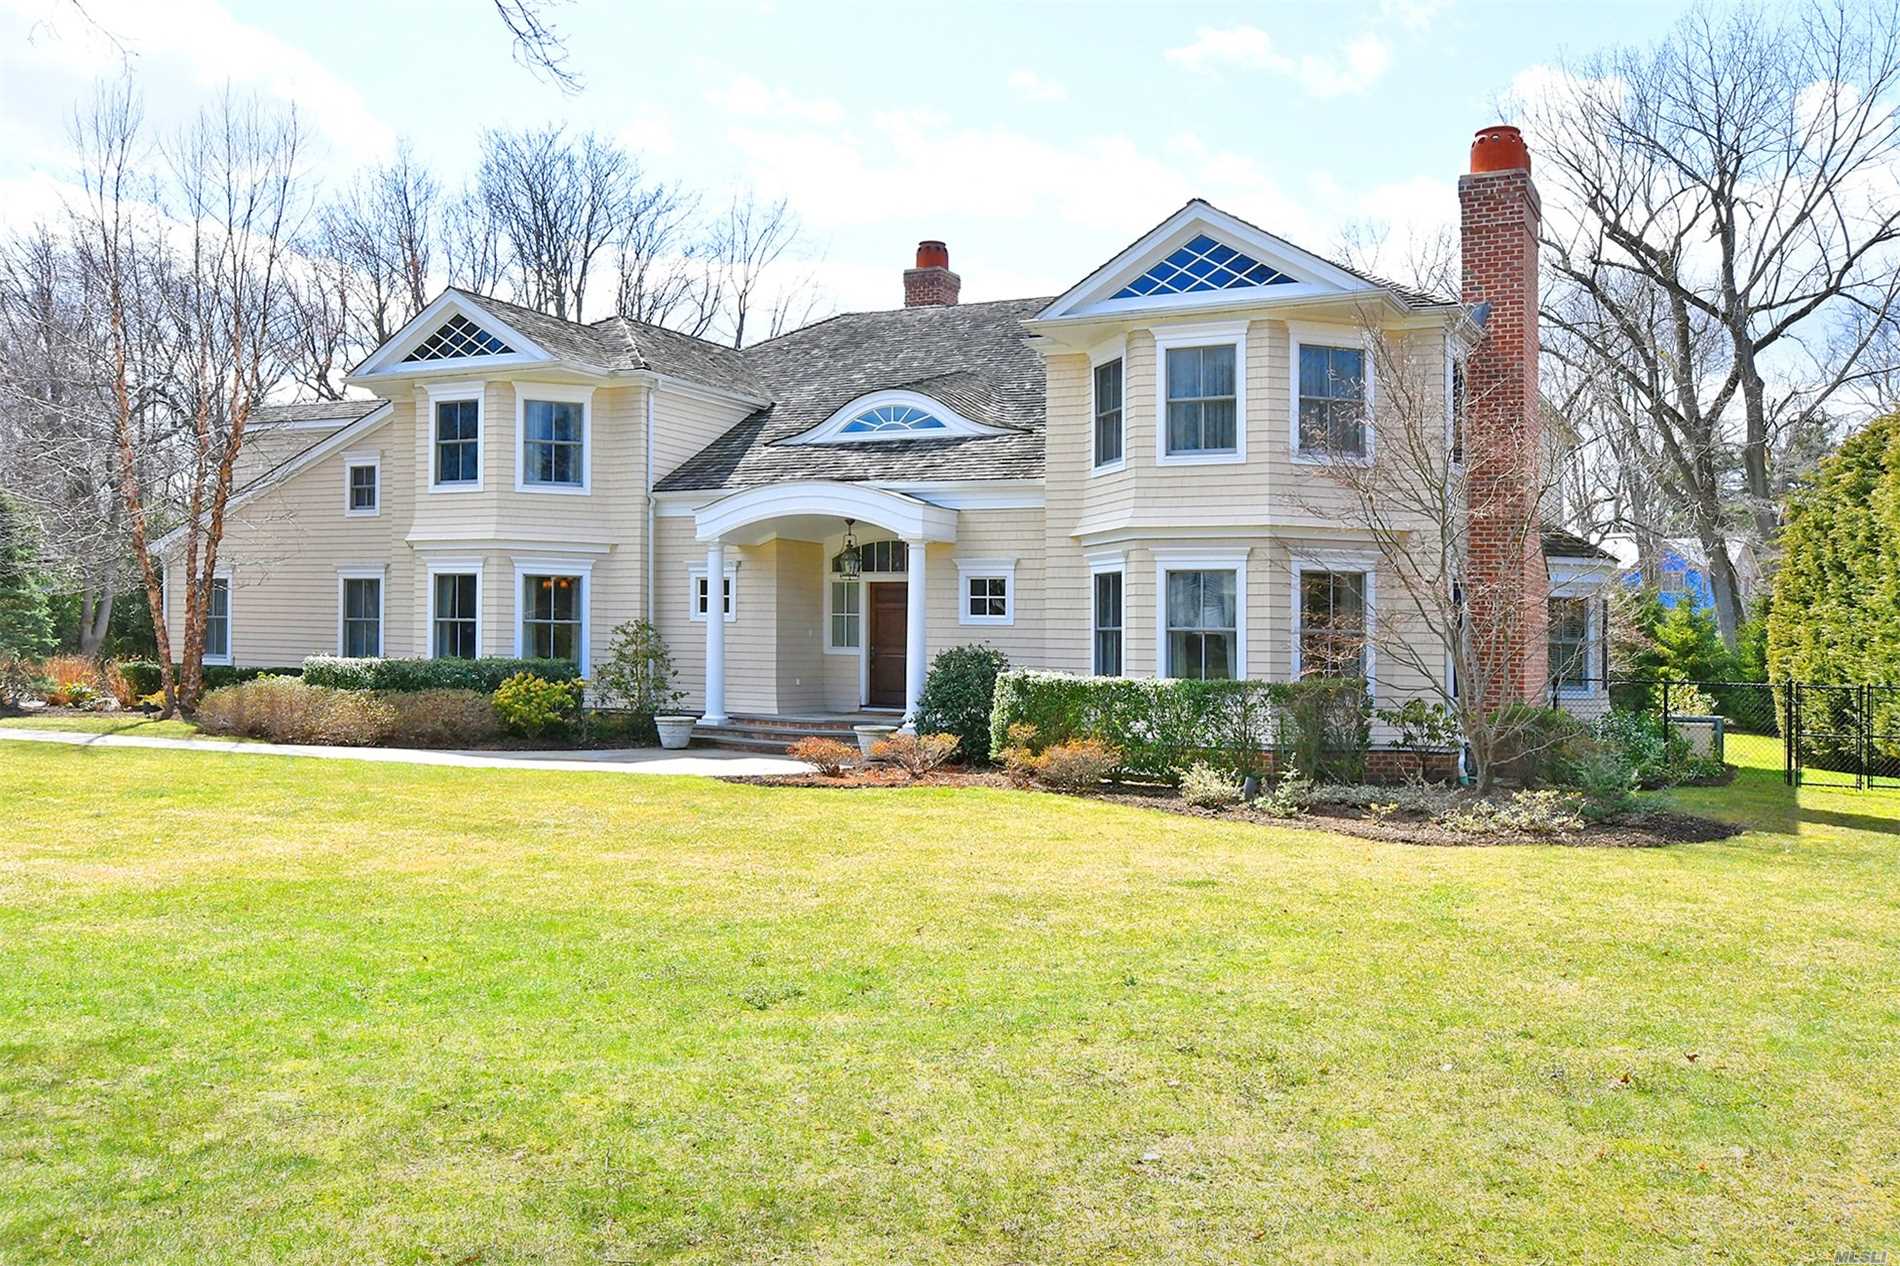 Custom Built In 2007! 6549 Interior Sq. Ft. On An Acre Plus., 3 Car Garage. 4/5 Bedrms, 4 Full And 2 Half Baths, Plus Bonus Rm. 3 Fireplcs. Elevator, Generator - Magnificent Throughout. Manhasset School District, Munsey Elementary - Incredible Amenities. Architectural Showcase!